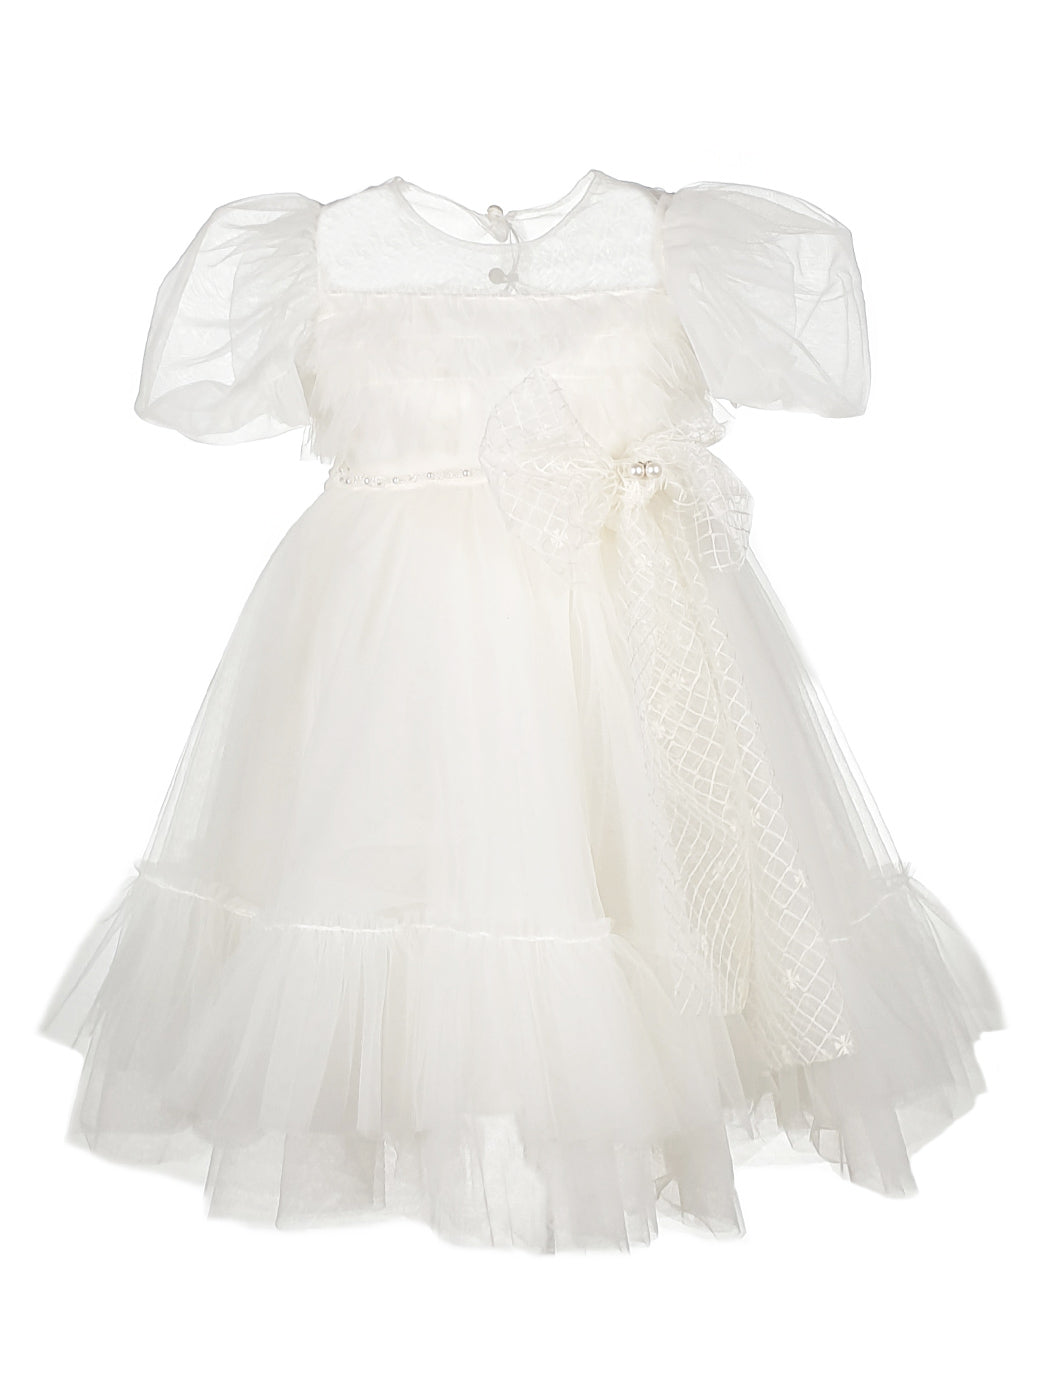 Baptism tulle Dress with gigot sleeve - RICH White